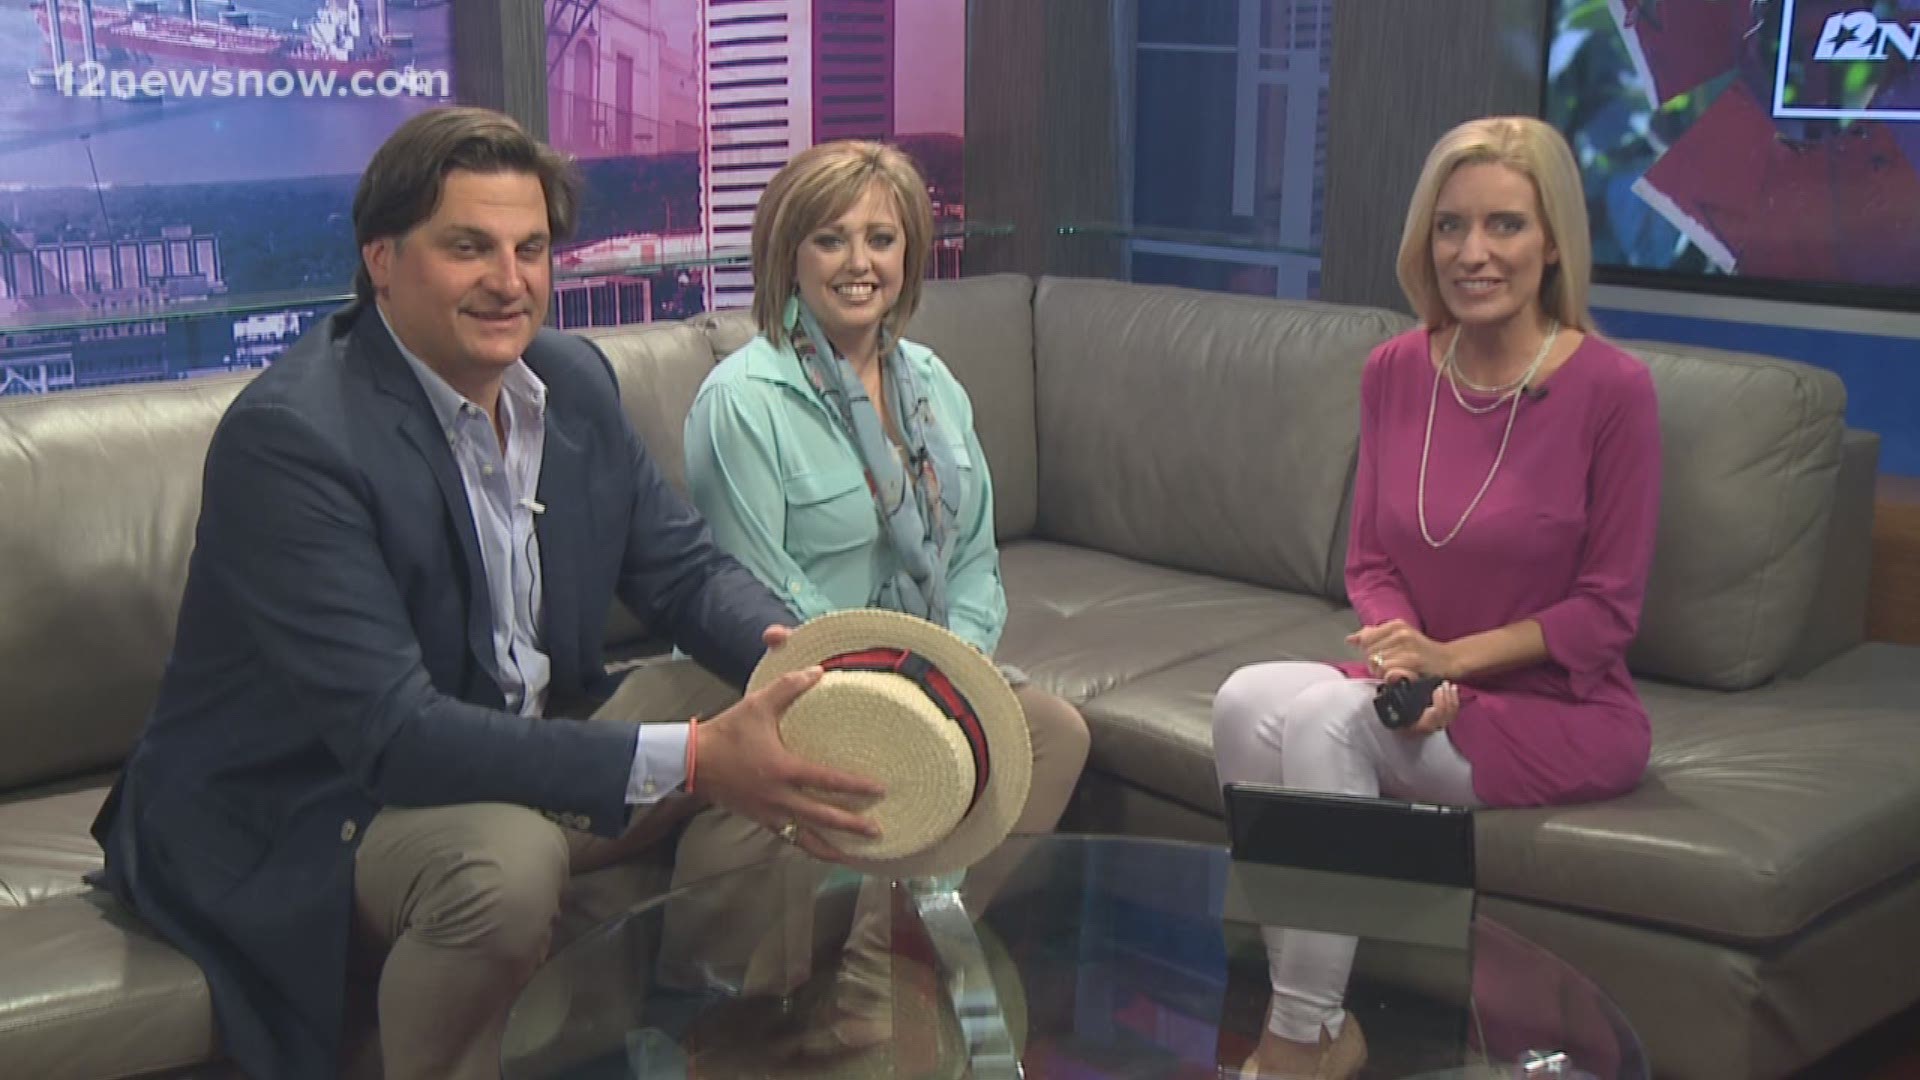 The Beaumont Heritage Society is Hosting its Chambers House Museum lawn party next Thursday and it'll be fun for the whole family.Janci Kimball and Will Jenkins are at 12News to tell you all about it.